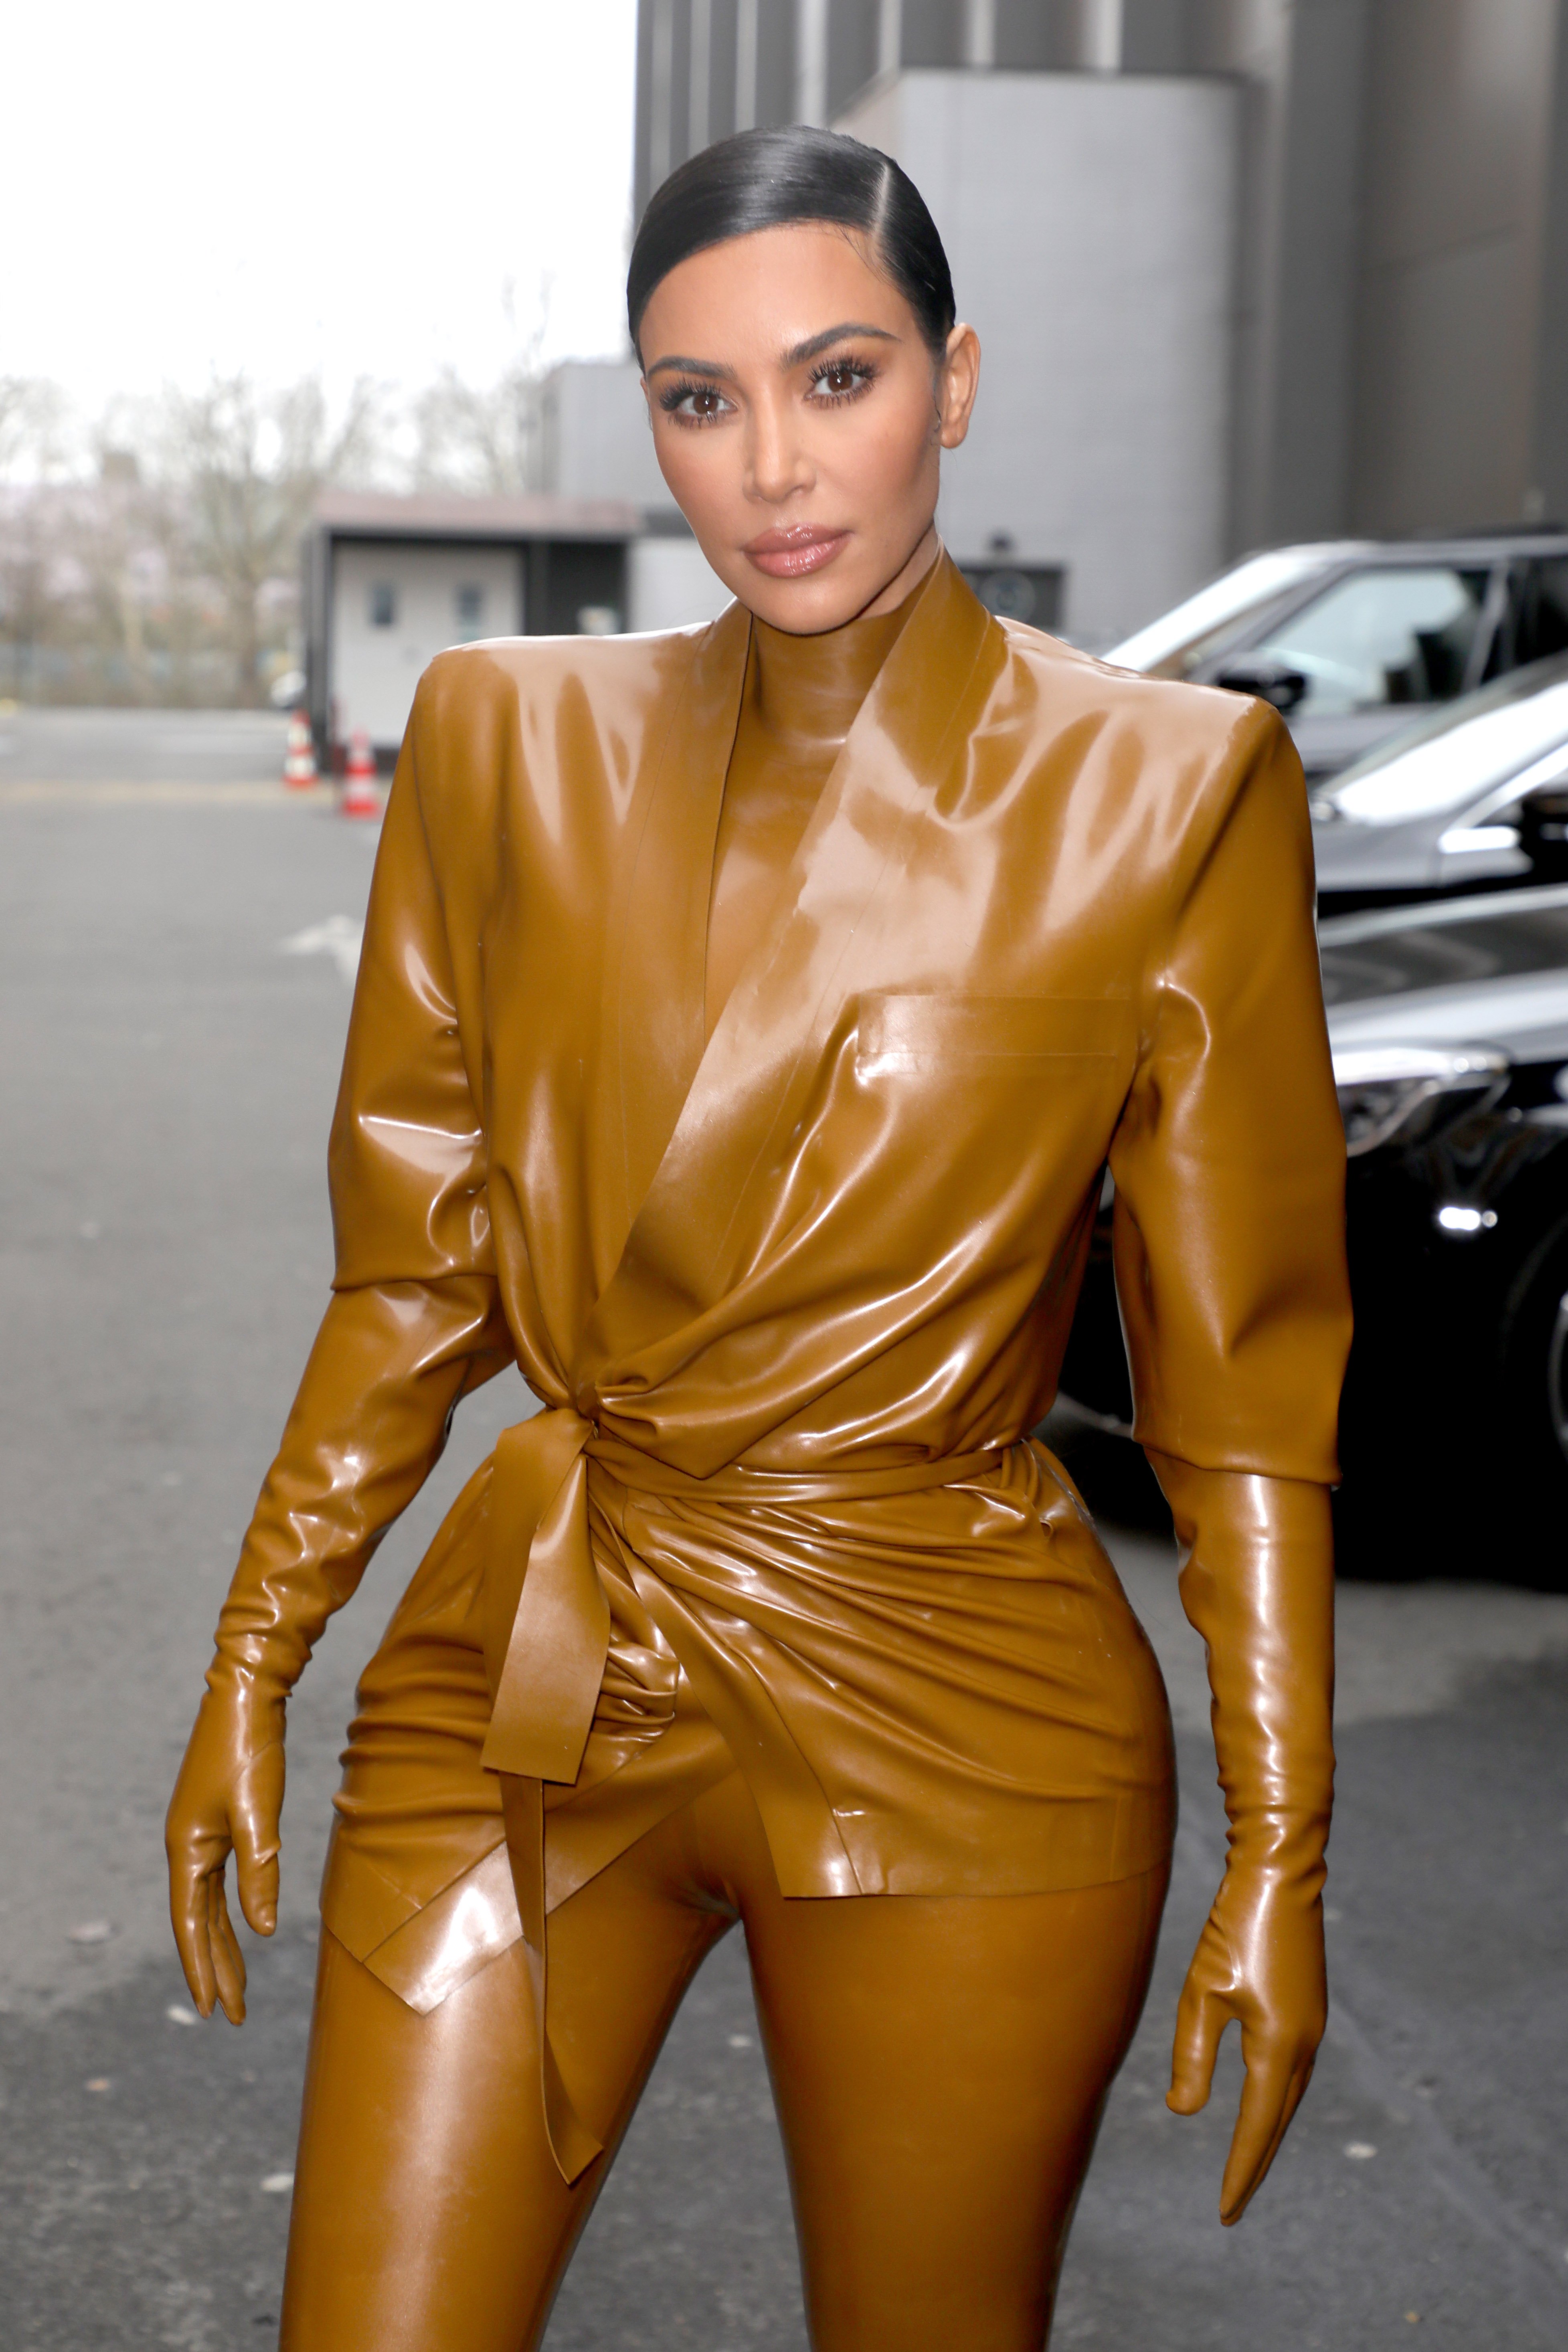 Kim Kardashian attends the Balenciaga show on March 01, 2020, in Paris, France. | Source: Getty Images.